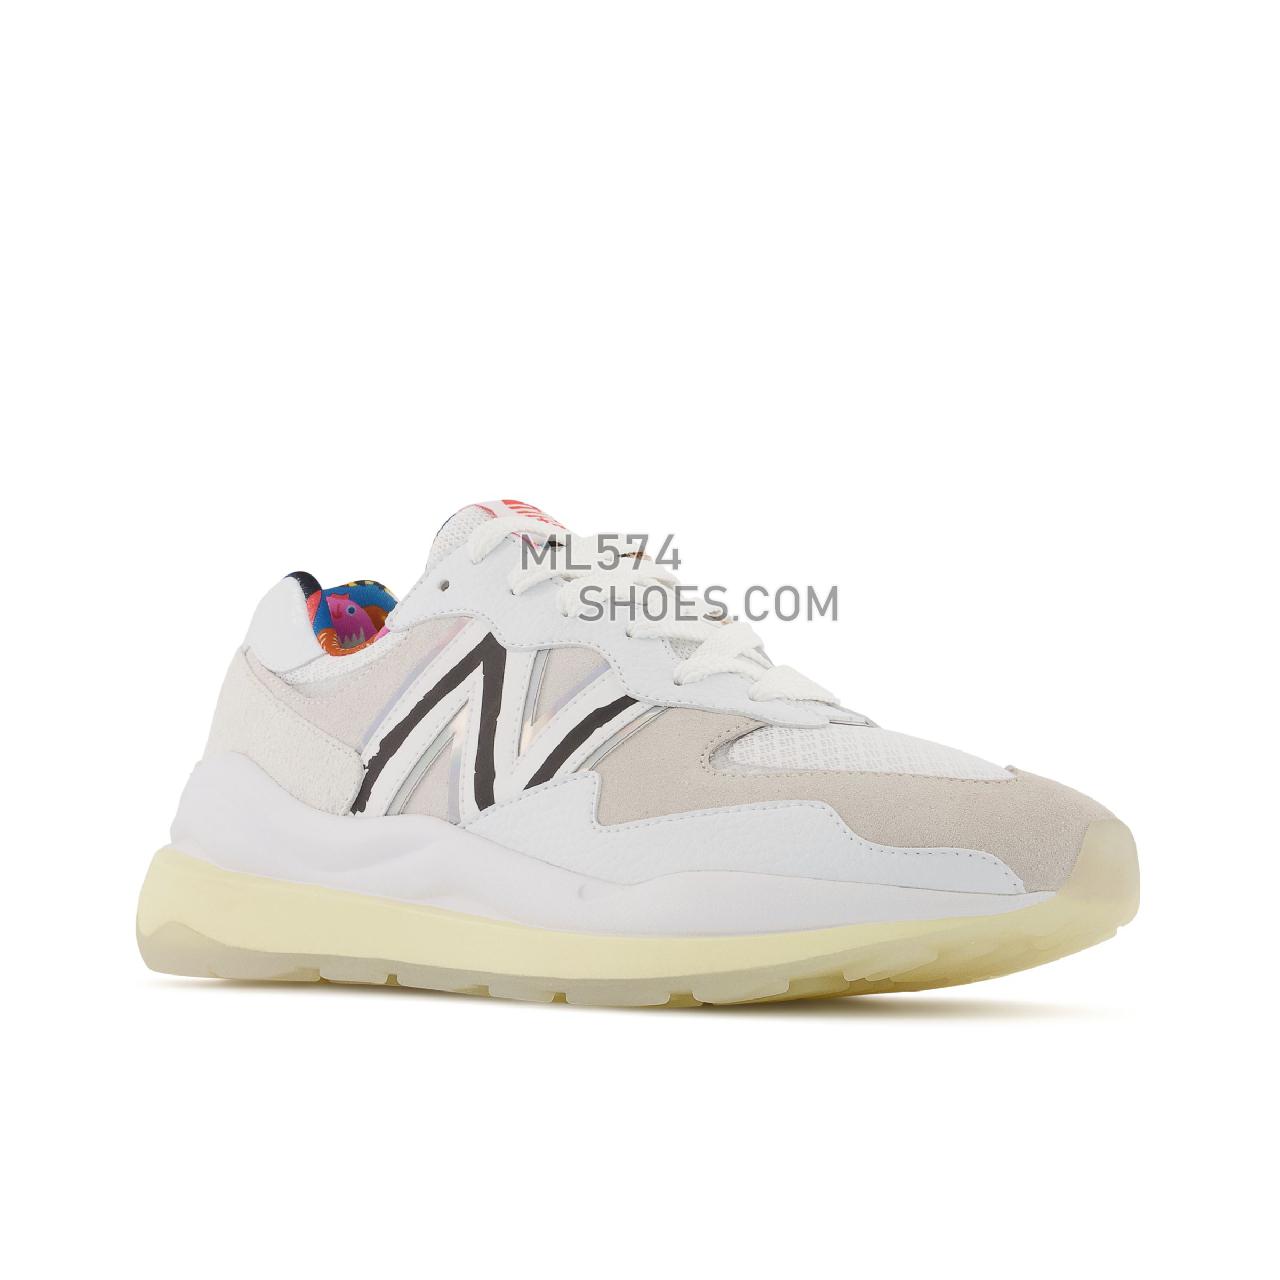 New Balance 57/40 - Men's Sport Style Sneakers - Nb White with Vanilla and Black - M5740PR1